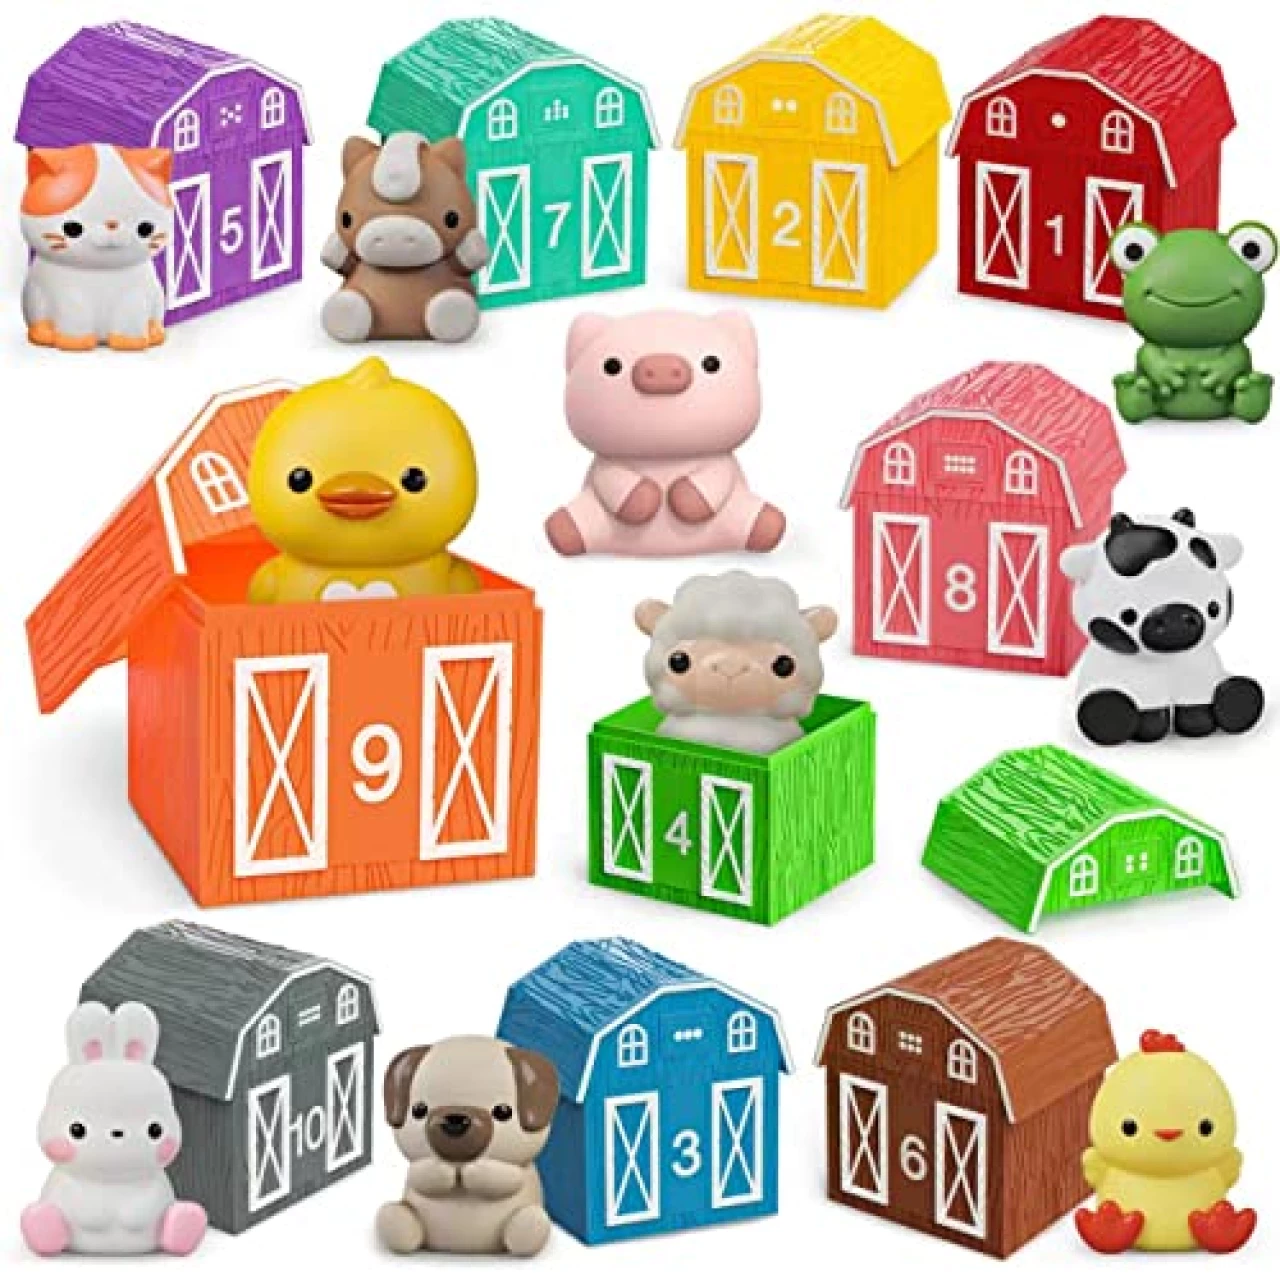 Learning Toy for Toddlers 1 2 3 Year Old, 10 Farm Animal Toys &amp; 10 Barns, Counting, Matching &amp; Sorting Montessori Educational Sensory Toys